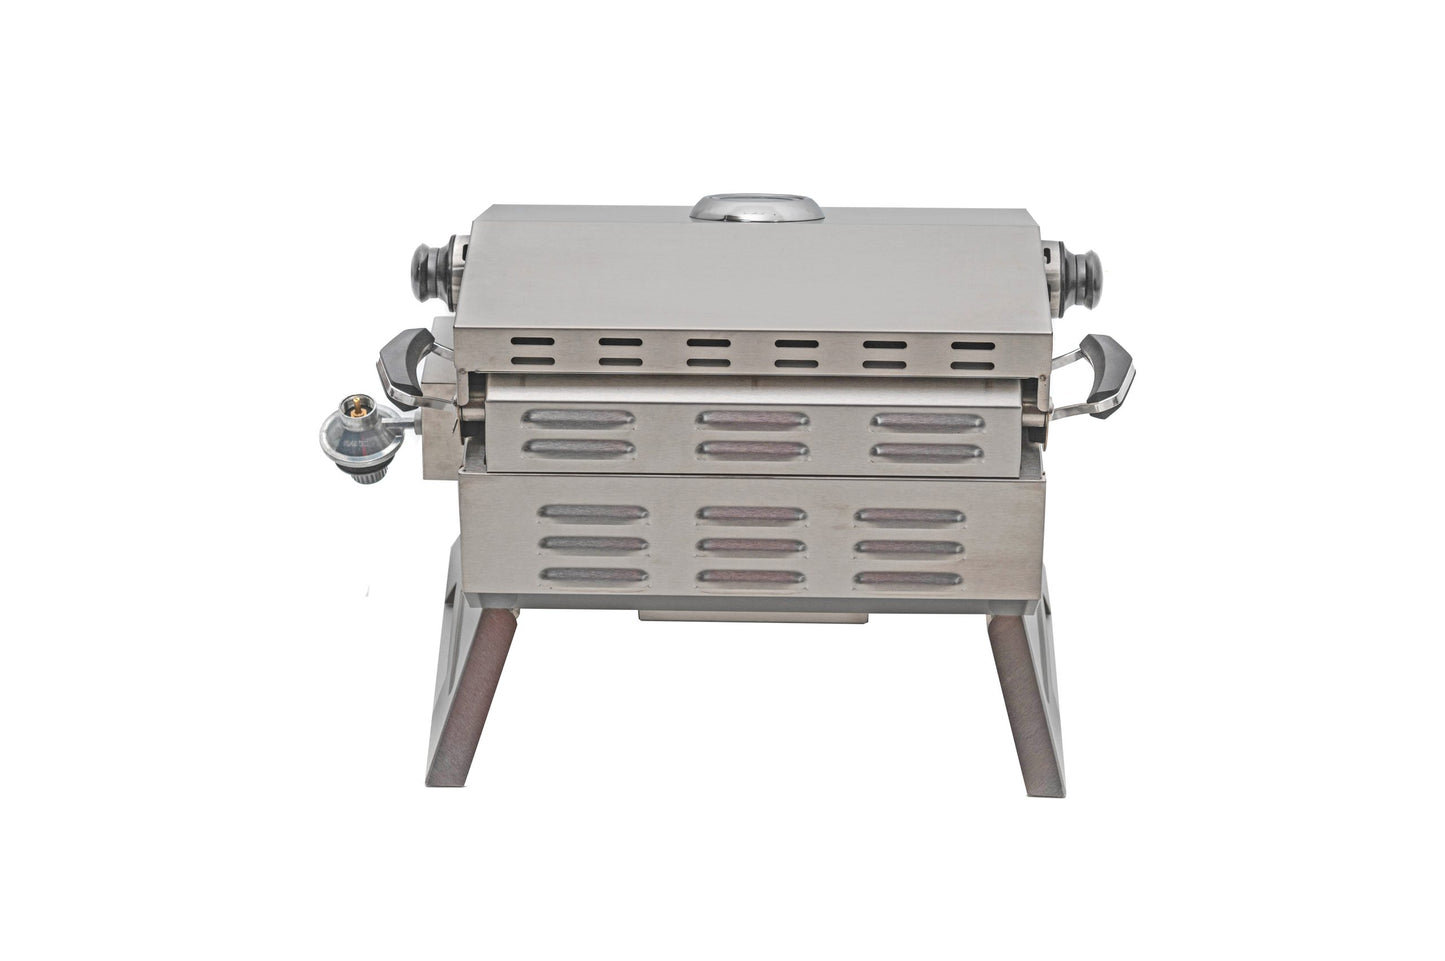 Jackson Grills Versa 75 Portable Stainless Steel Gas Grill